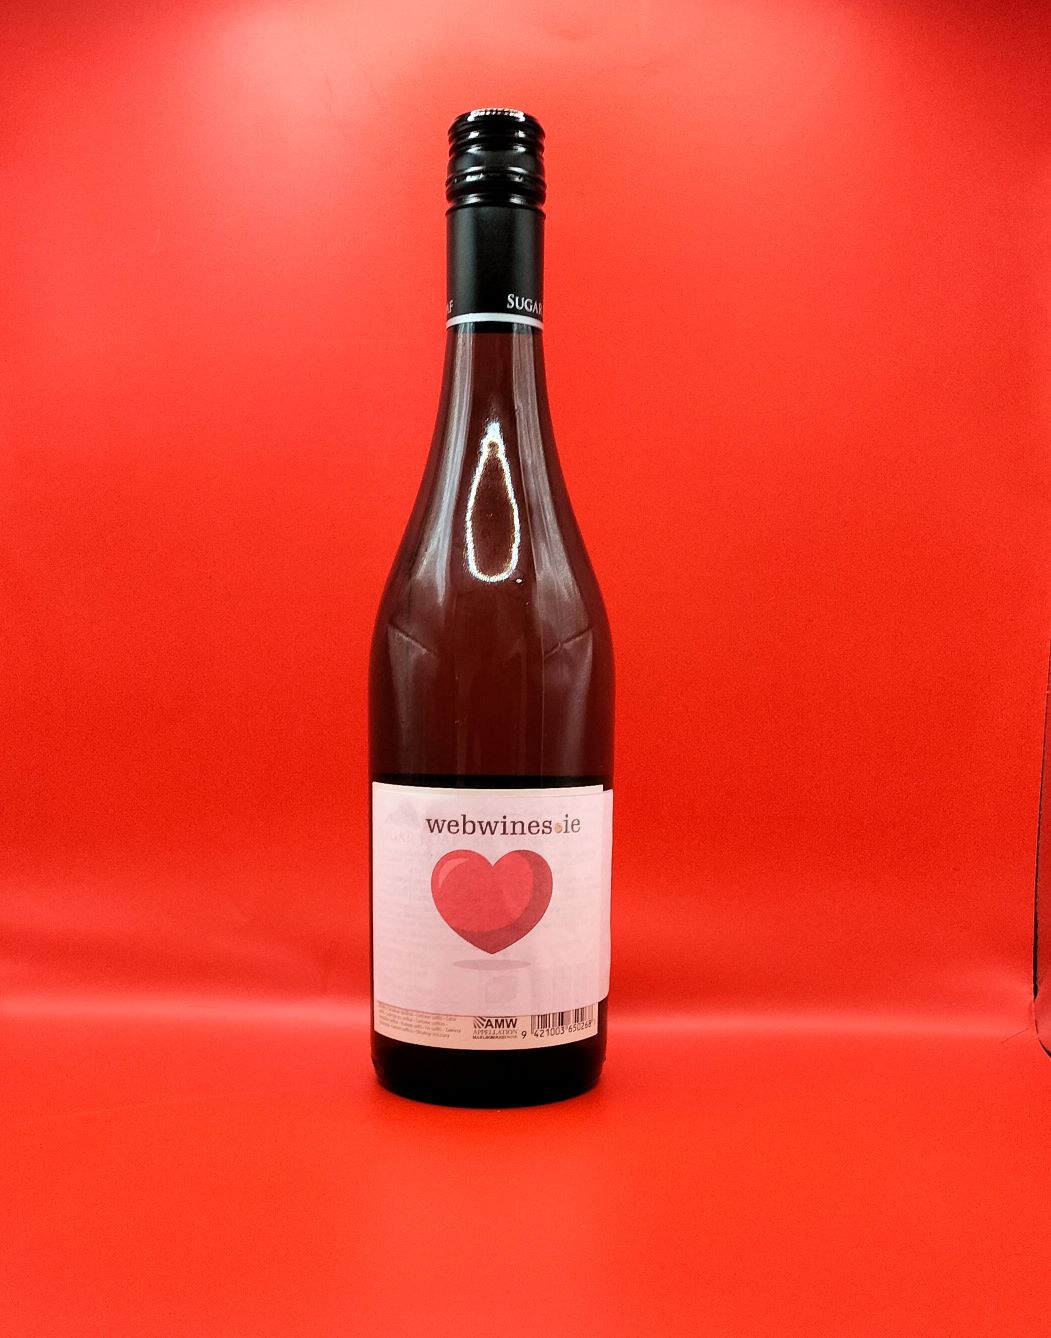 Why Rosé wines for Valentines?